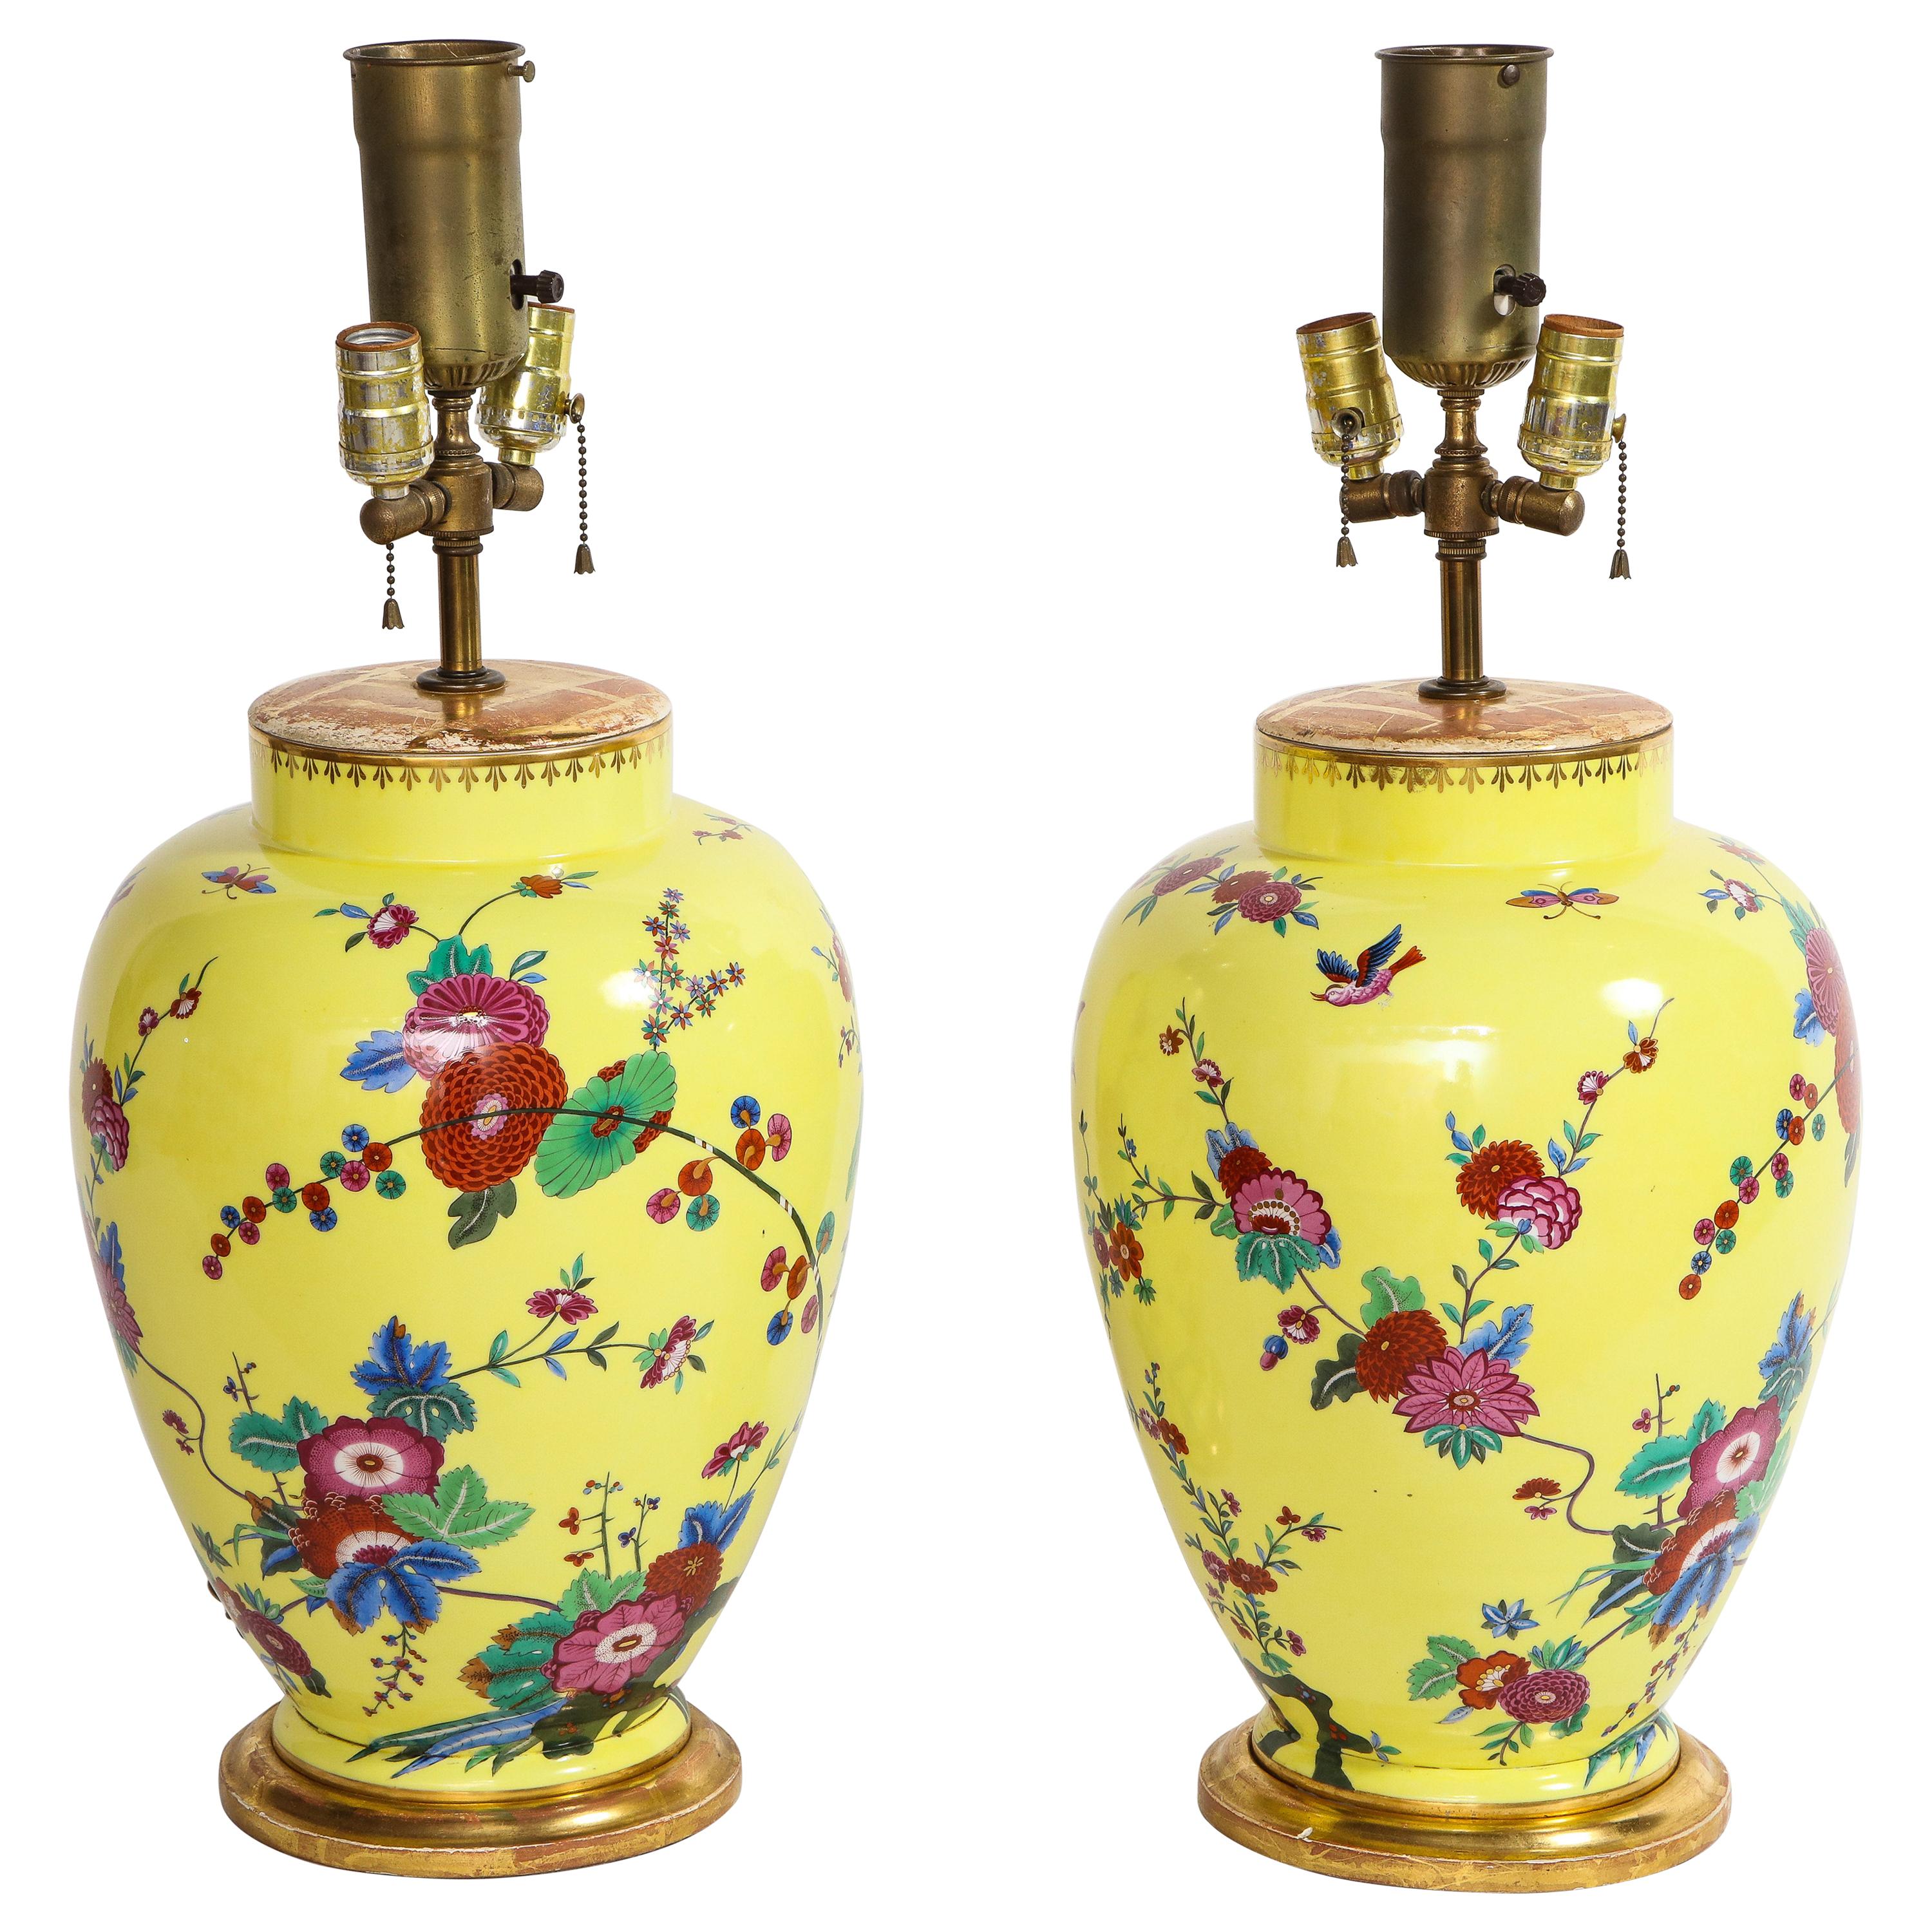 Pair of Yellow Ground German Porcelain Vases with Flower and Bird Decoration